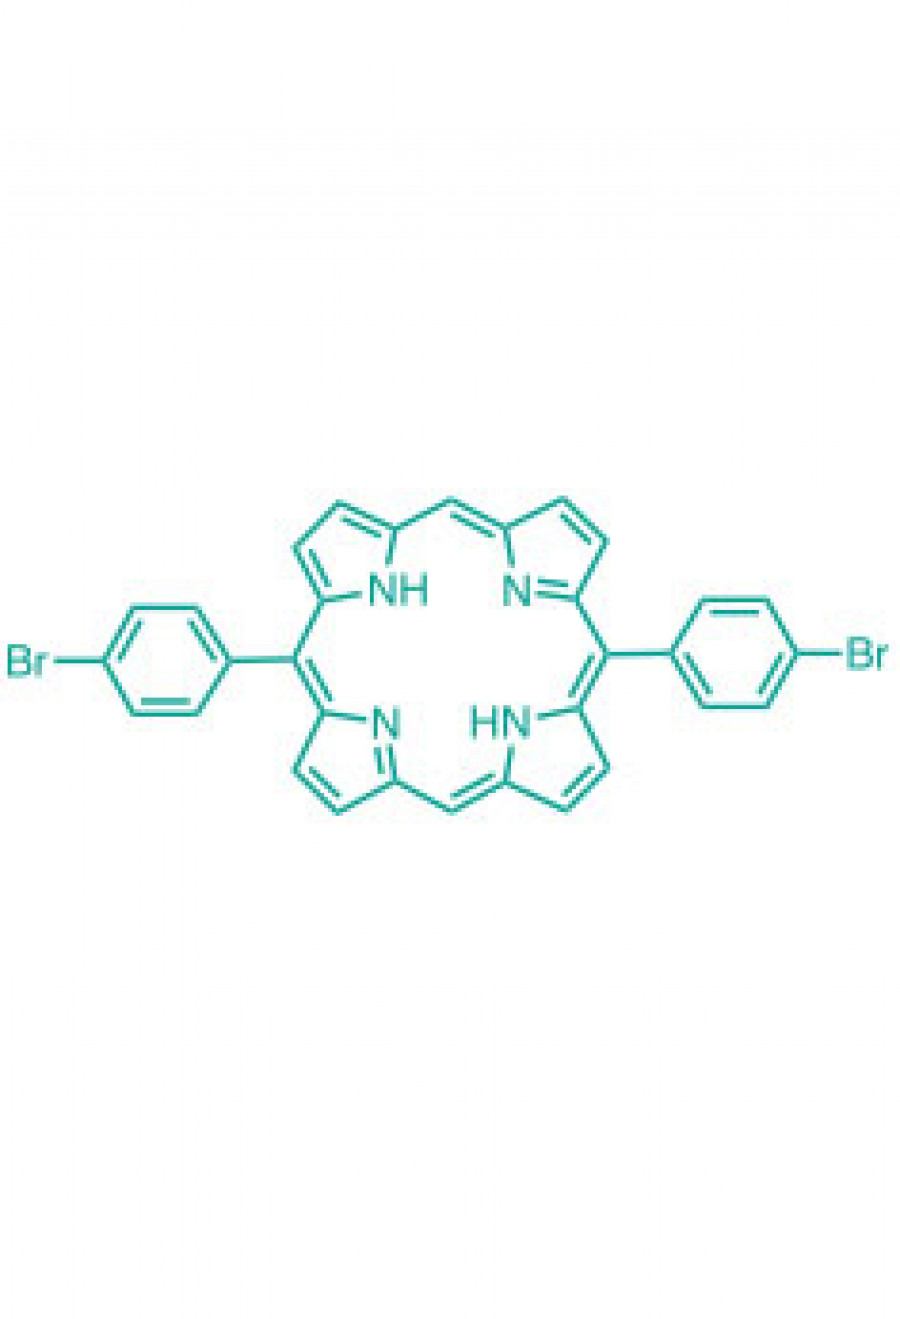 5,15-(di-4-bromophenyl)porphyrin  | Porphychem Expert porphyrin synthesis for research & industry